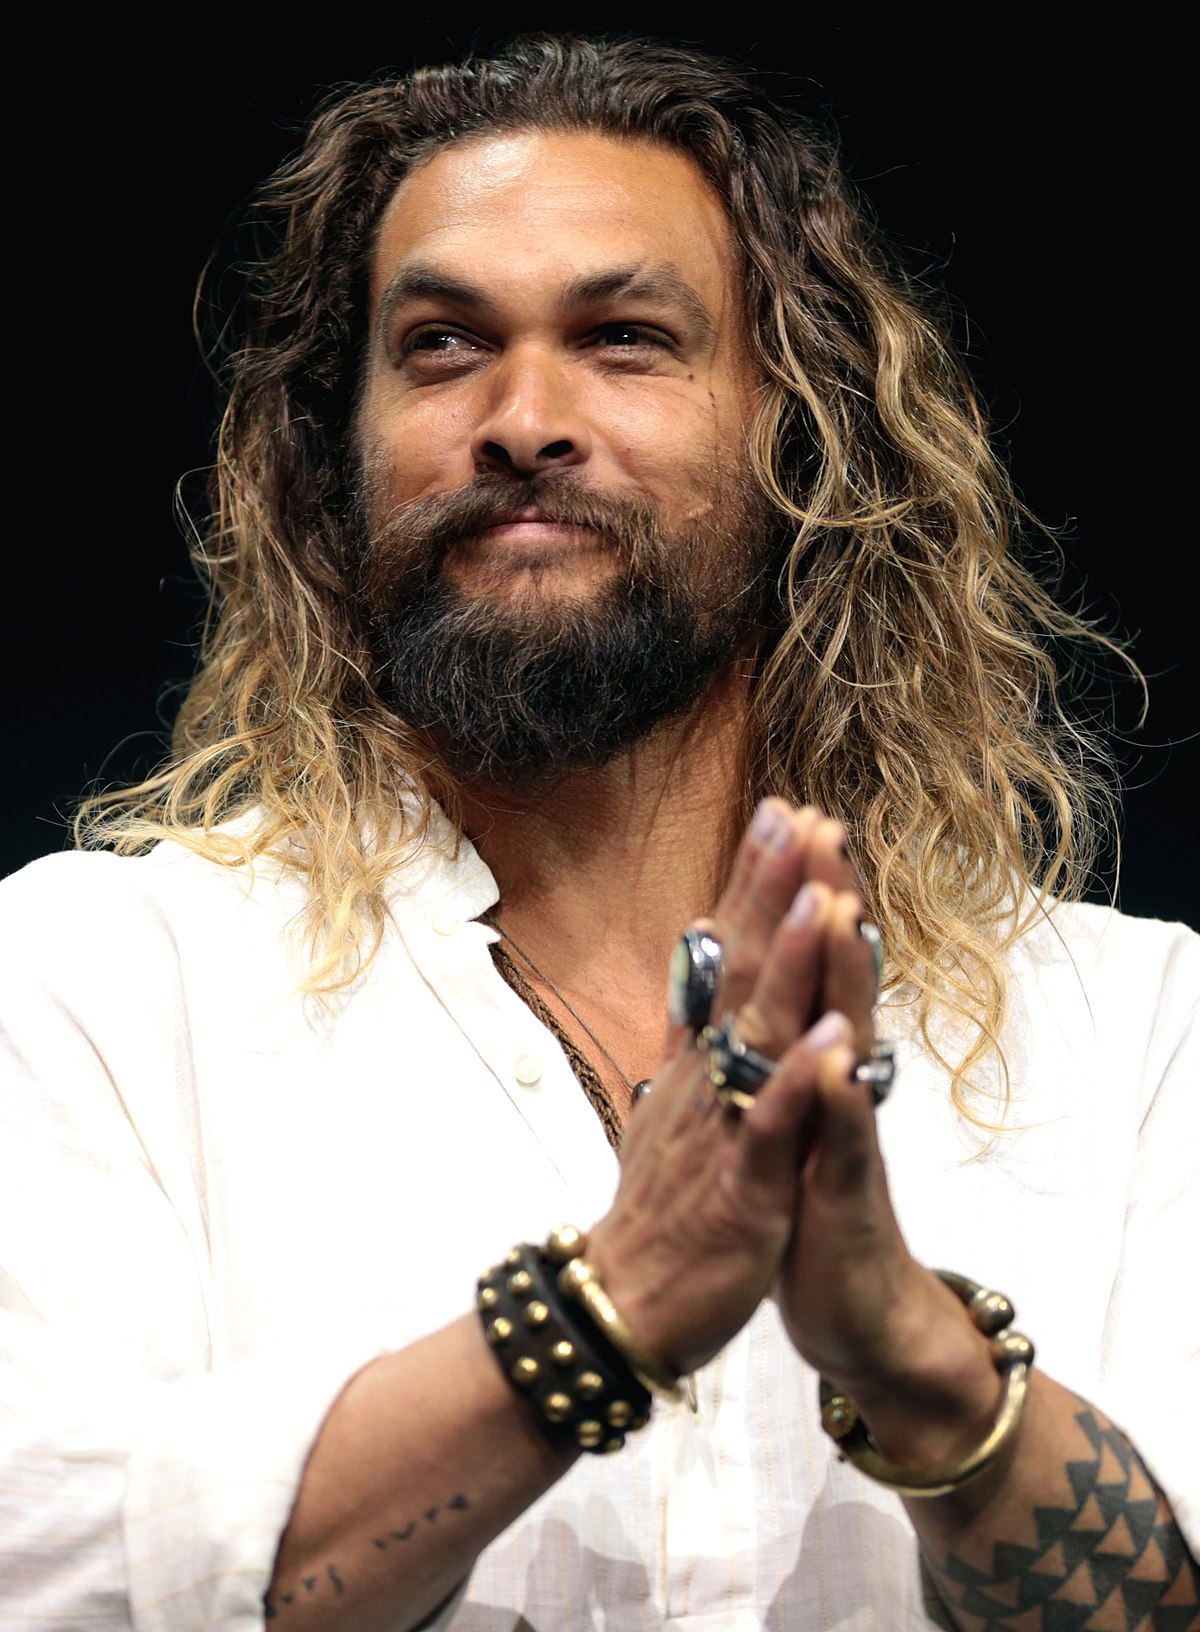 We Ve Dug Up Some Old Pictures Of Jason Momoa And They Are